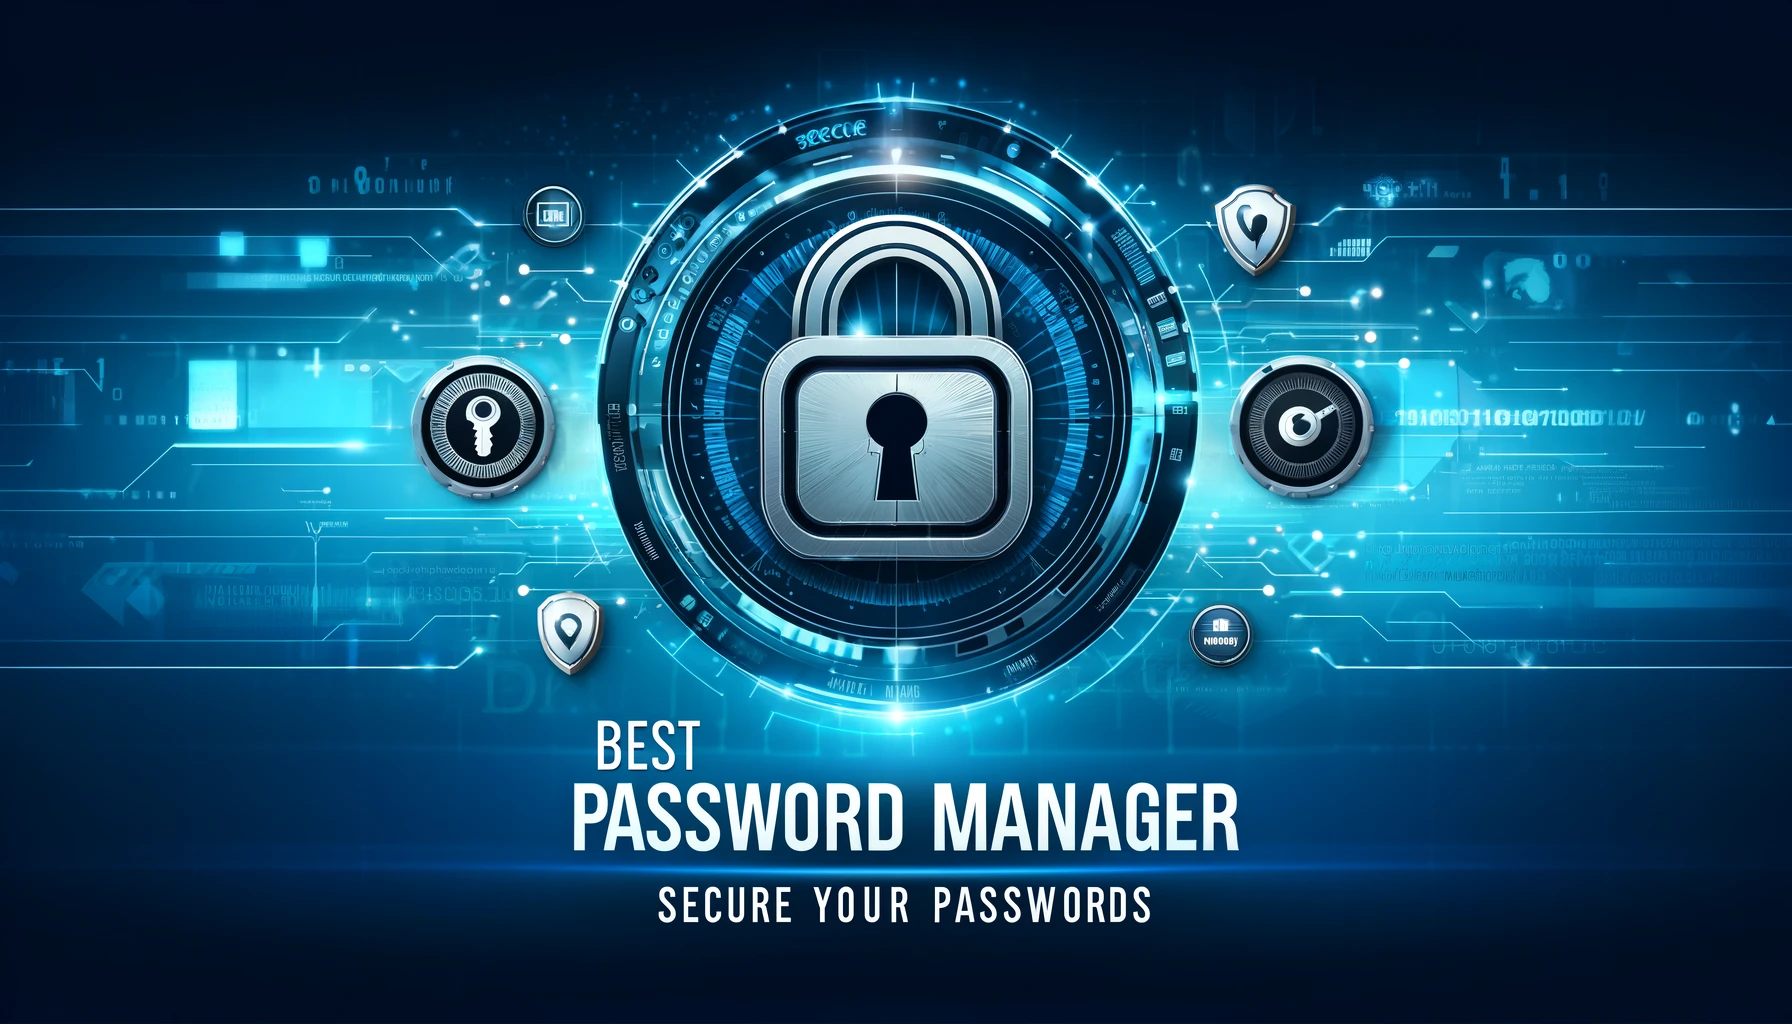 Best Password Manager - Secure Your Passwords